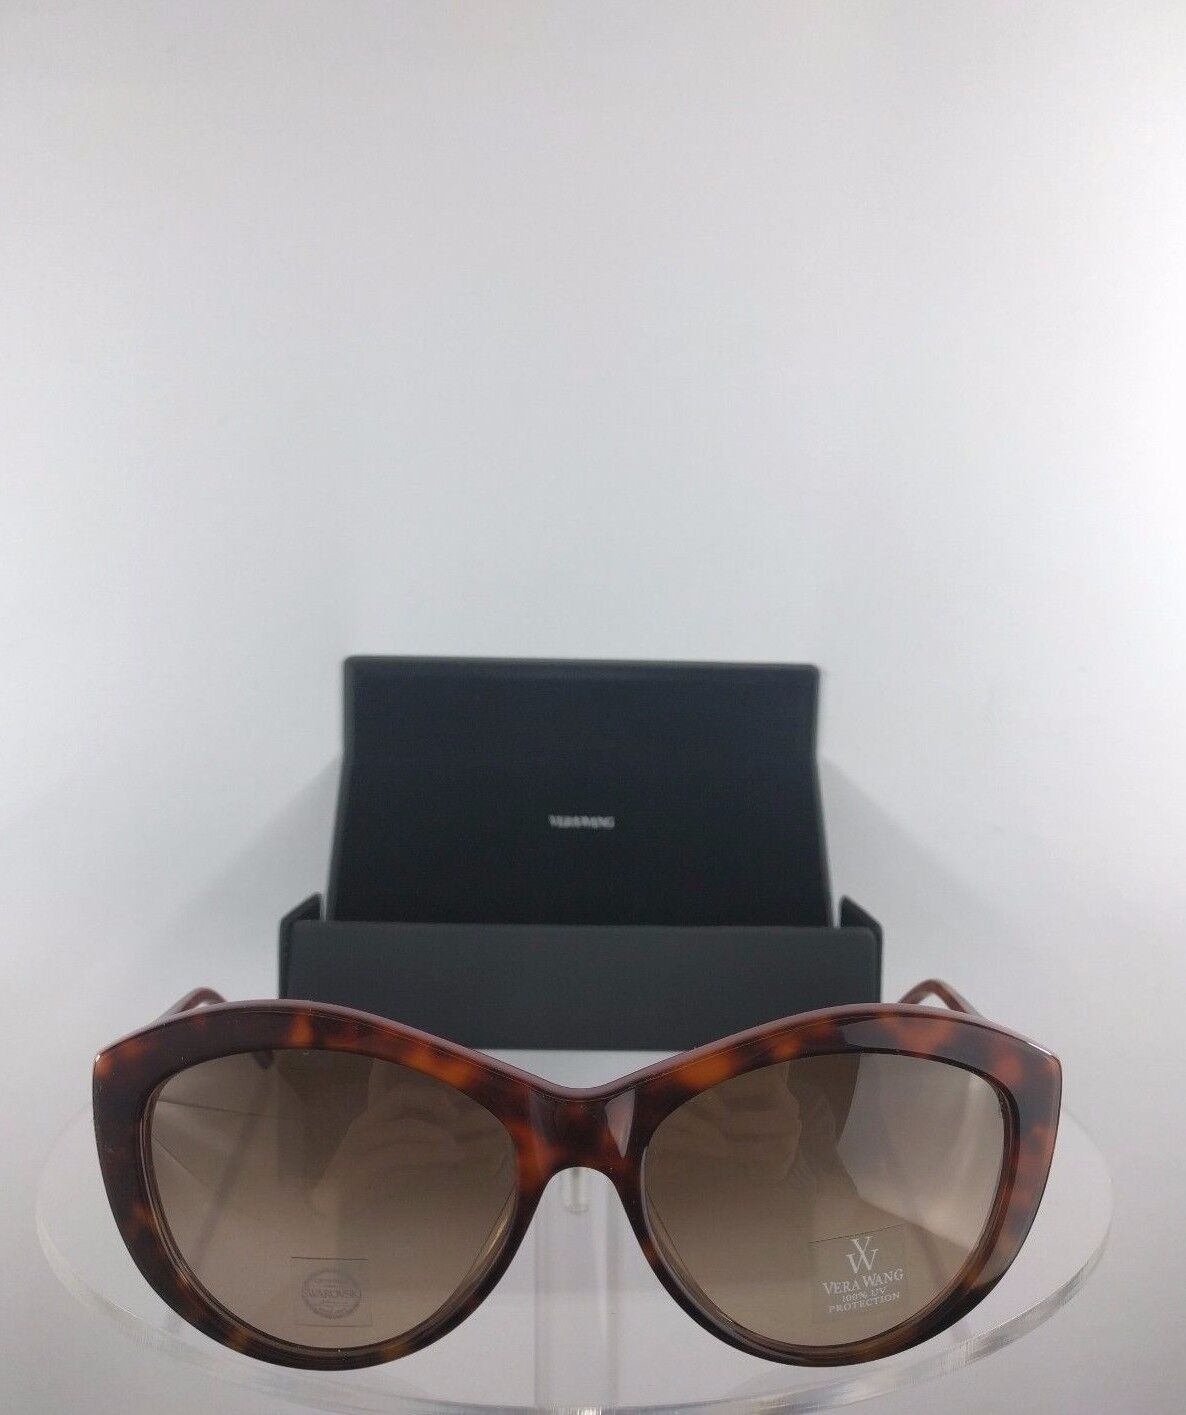 Brand New Authentic Vera Wang Sunglasses Agnella TO Crystal Tortoise Frame